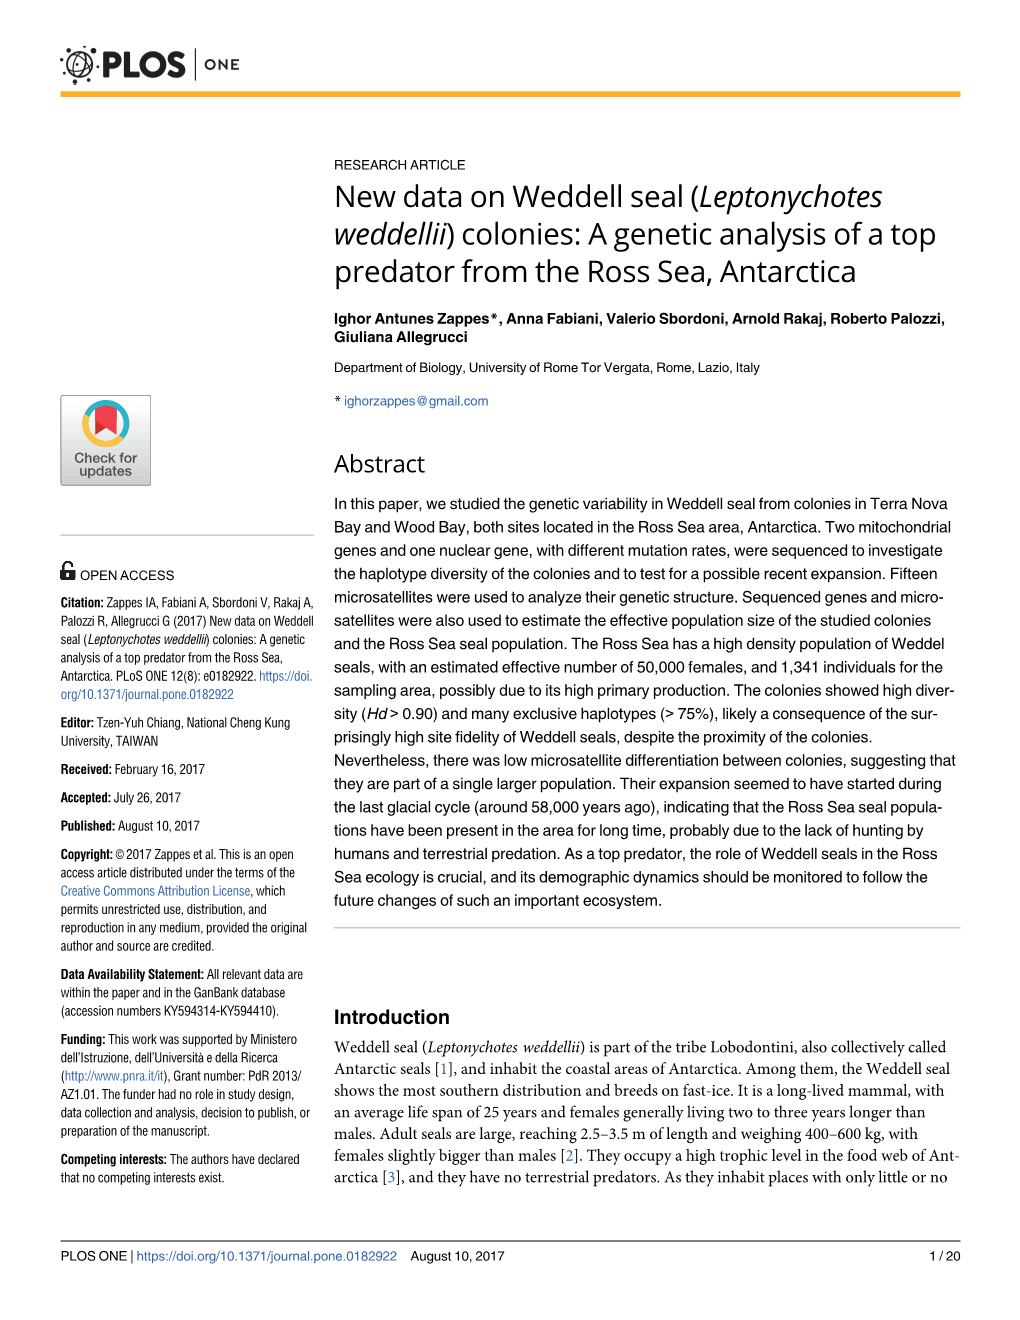 New Data on Weddell Seal (Leptonychotes Weddellii) Colonies: a Genetic Analysis of a Top Predator from the Ross Sea, Antarctica